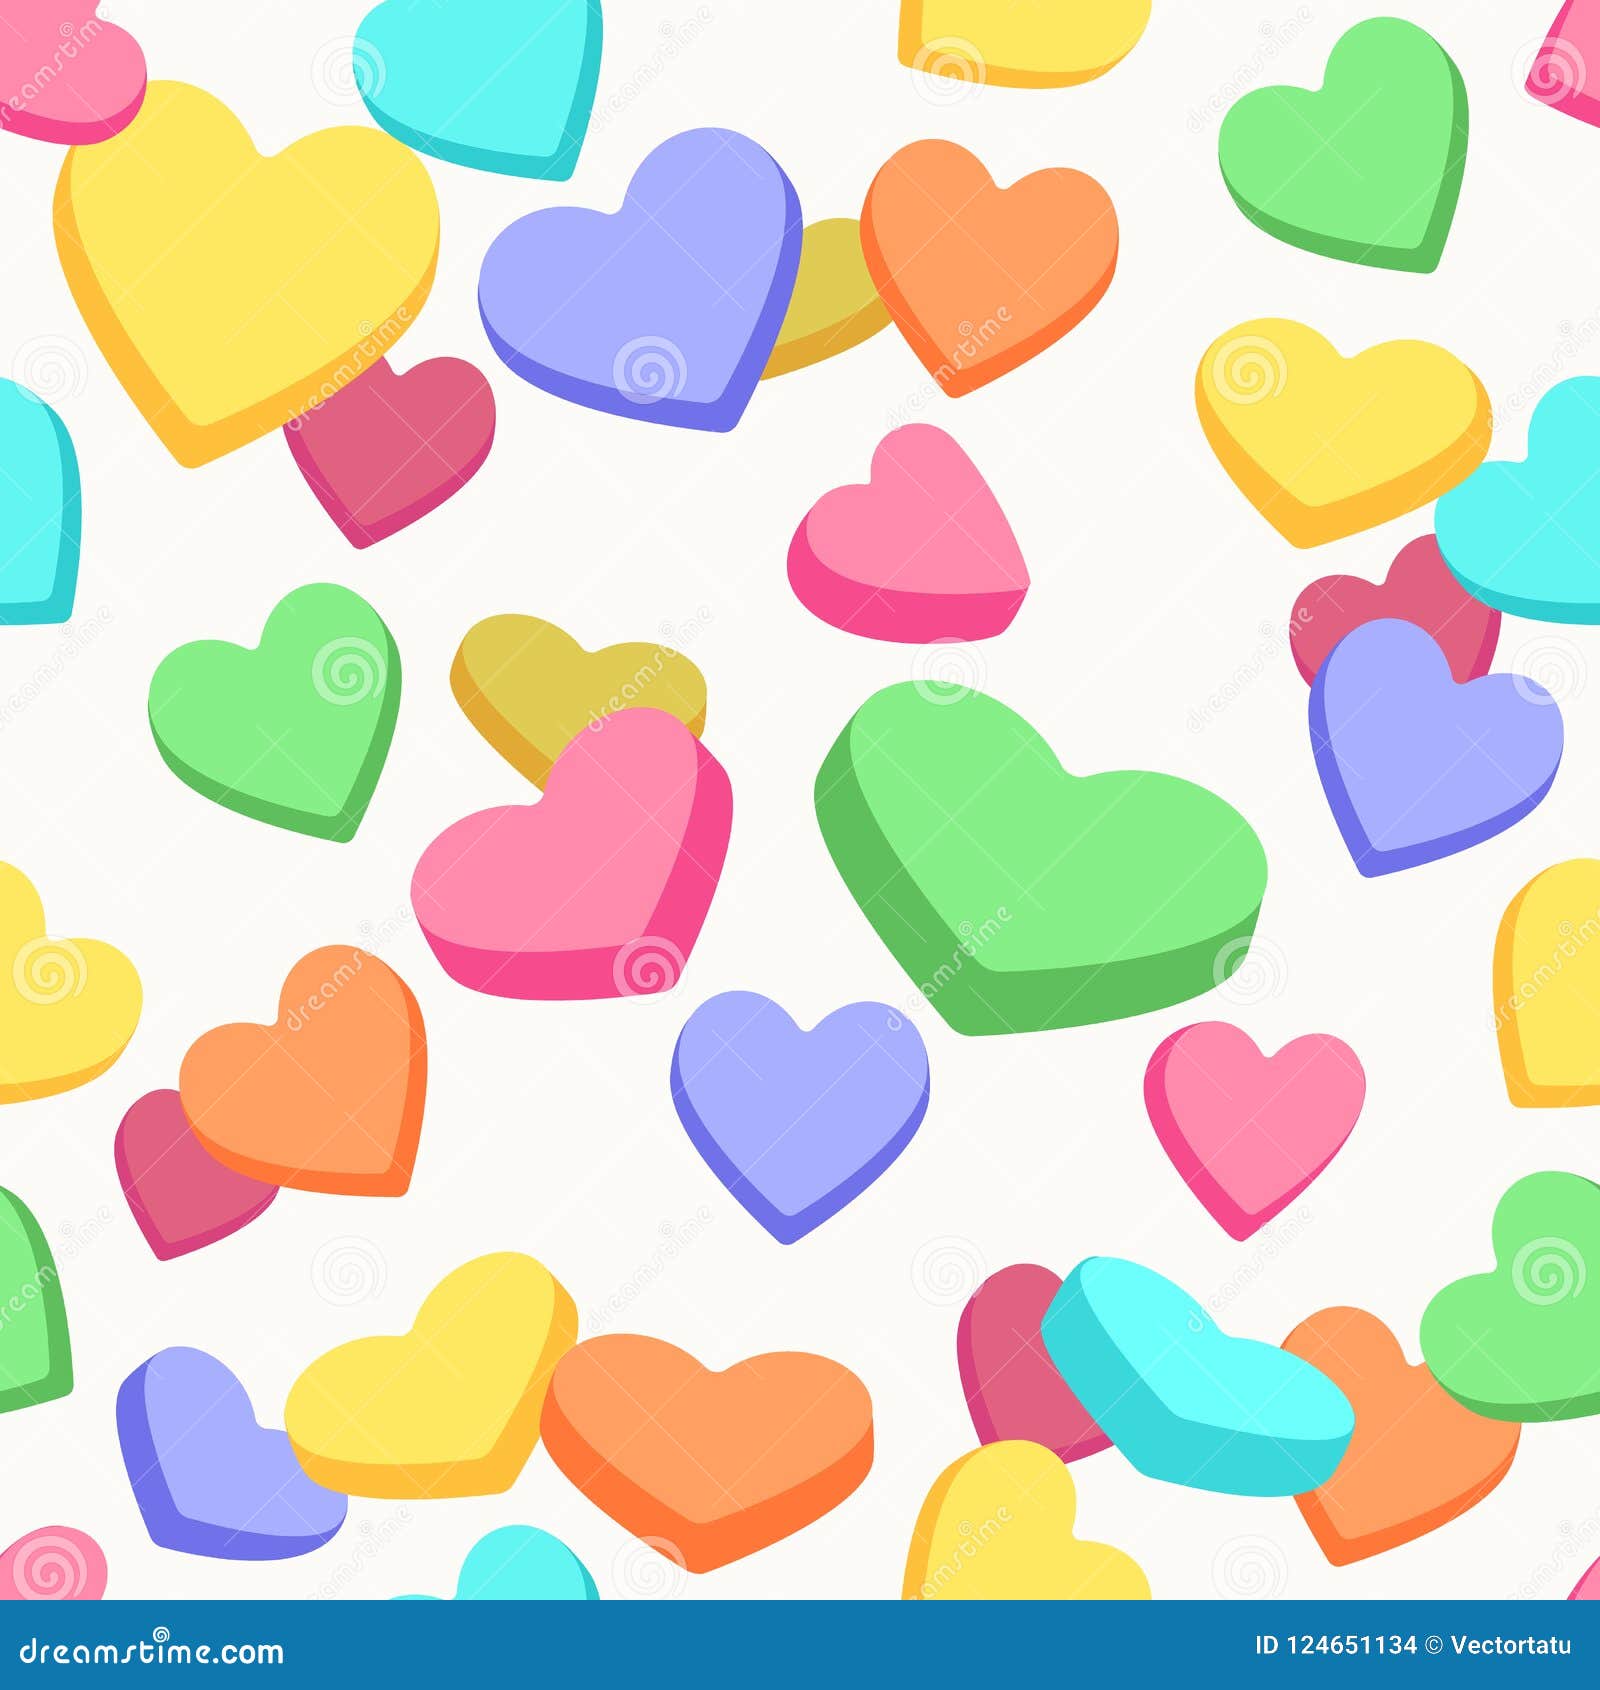 Why Your Candy Hearts May Be Conversation-Free This Valentine's Day